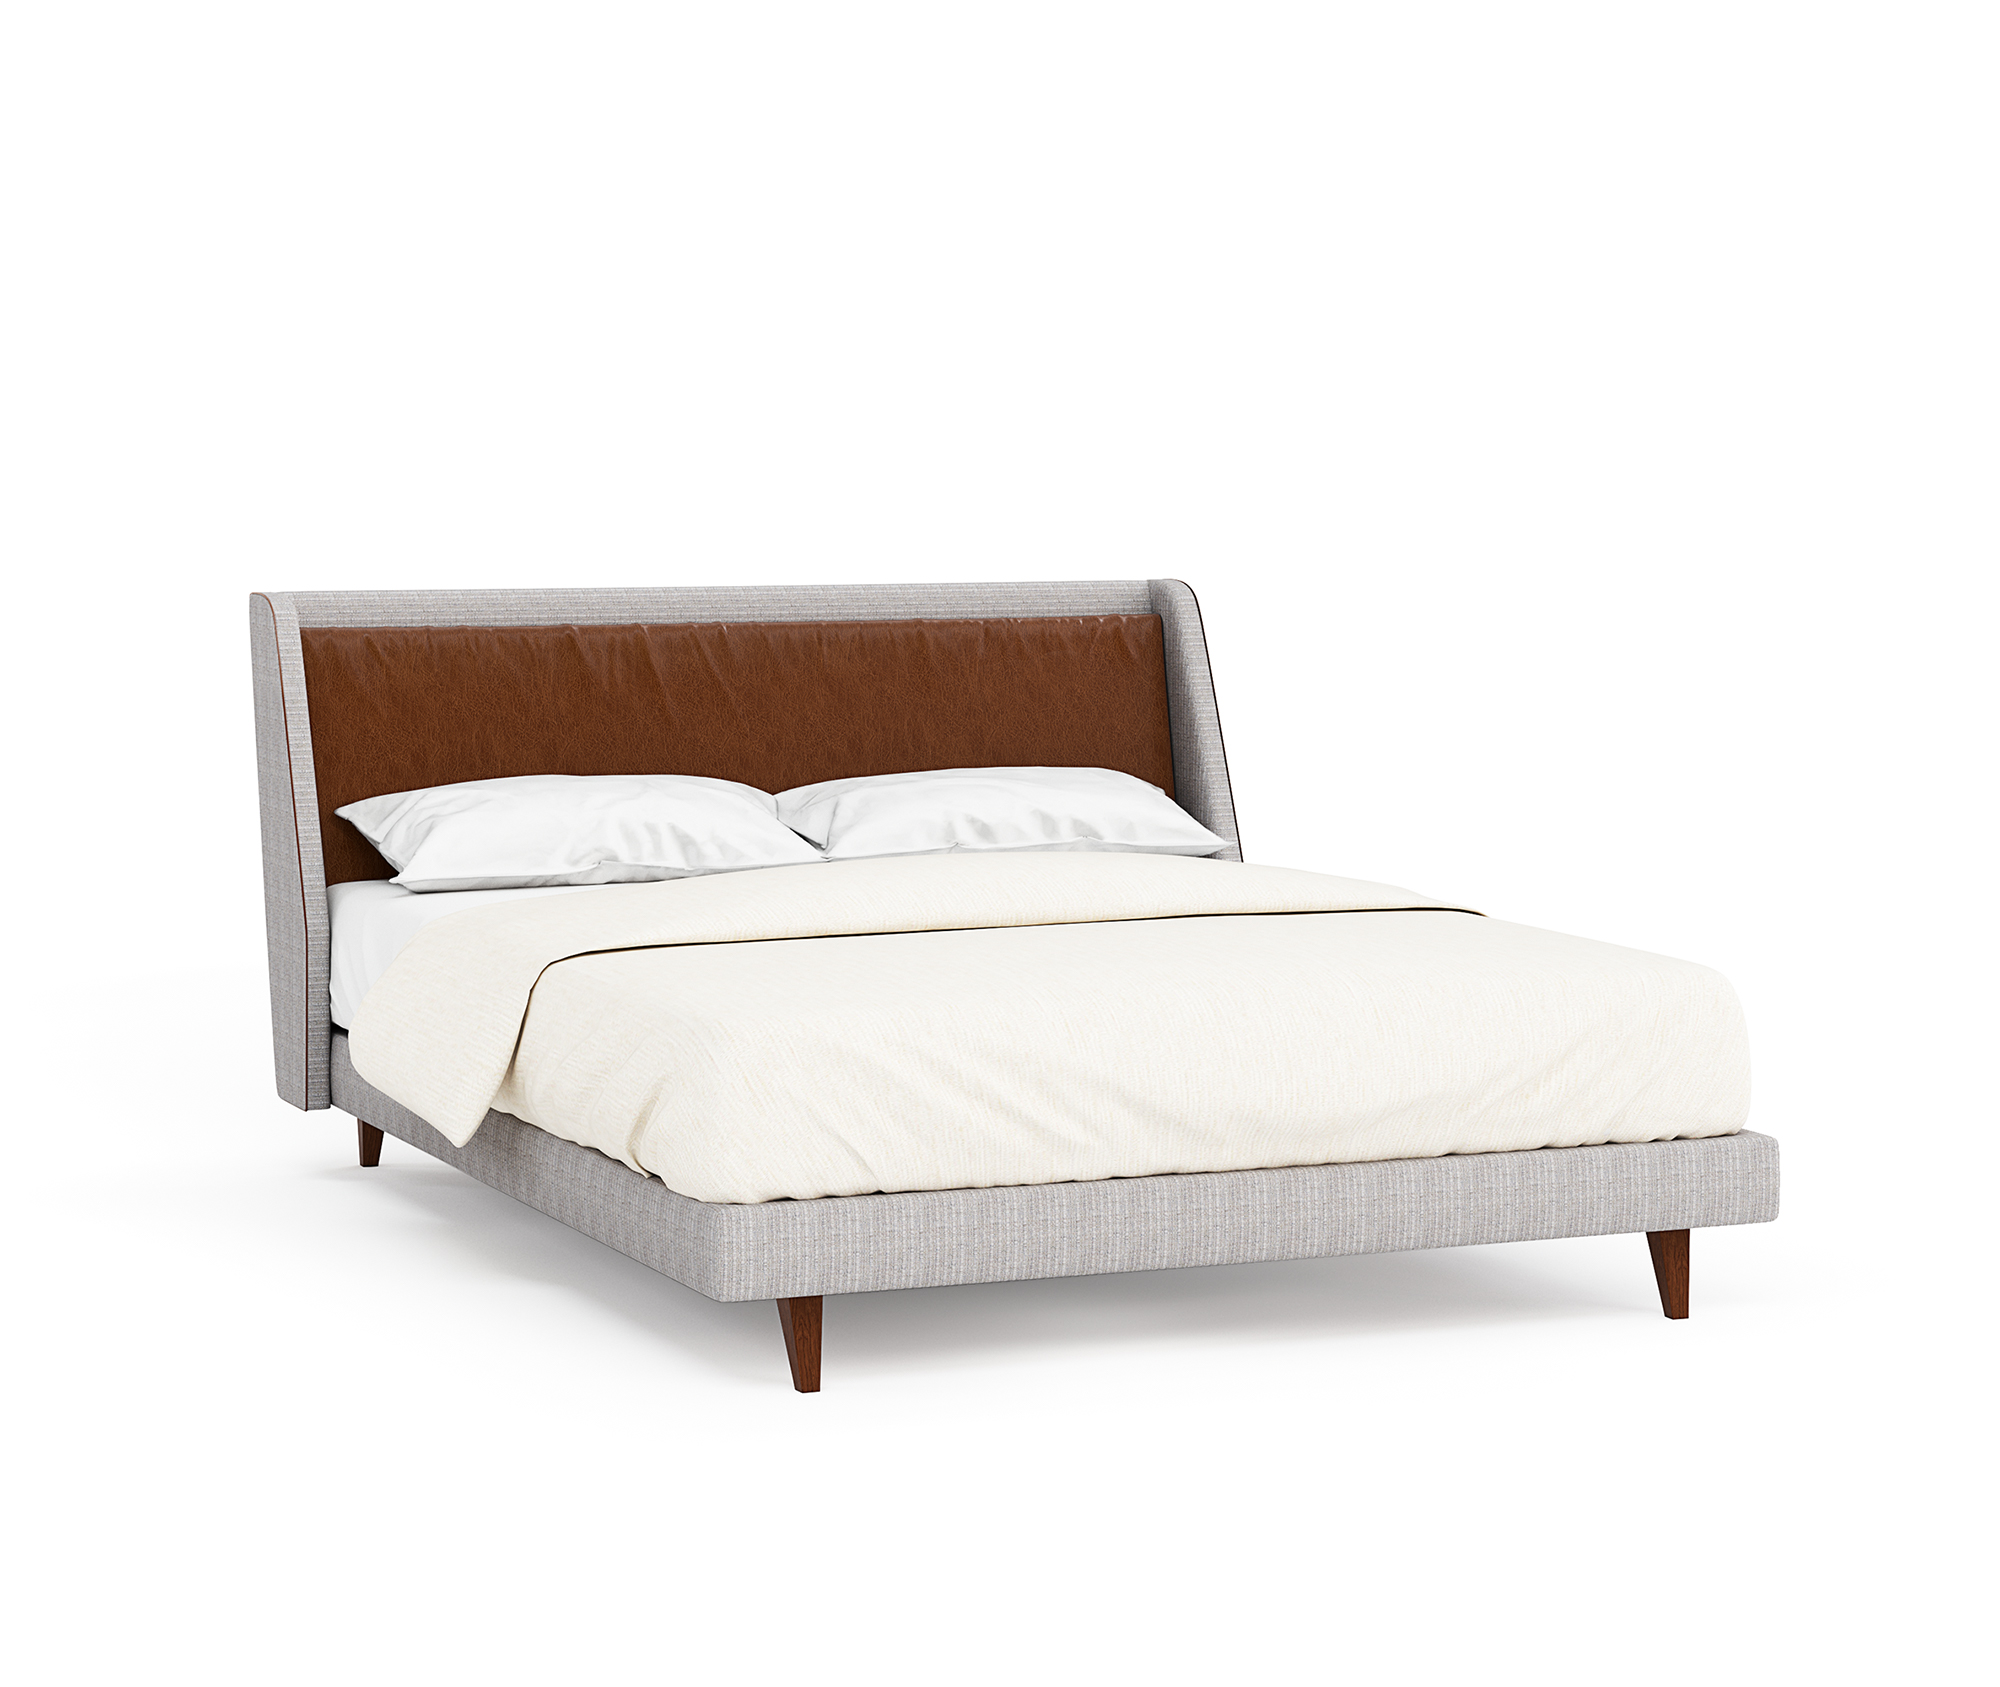 Cliff-Young-Ltd_Luca-Bed_int_products